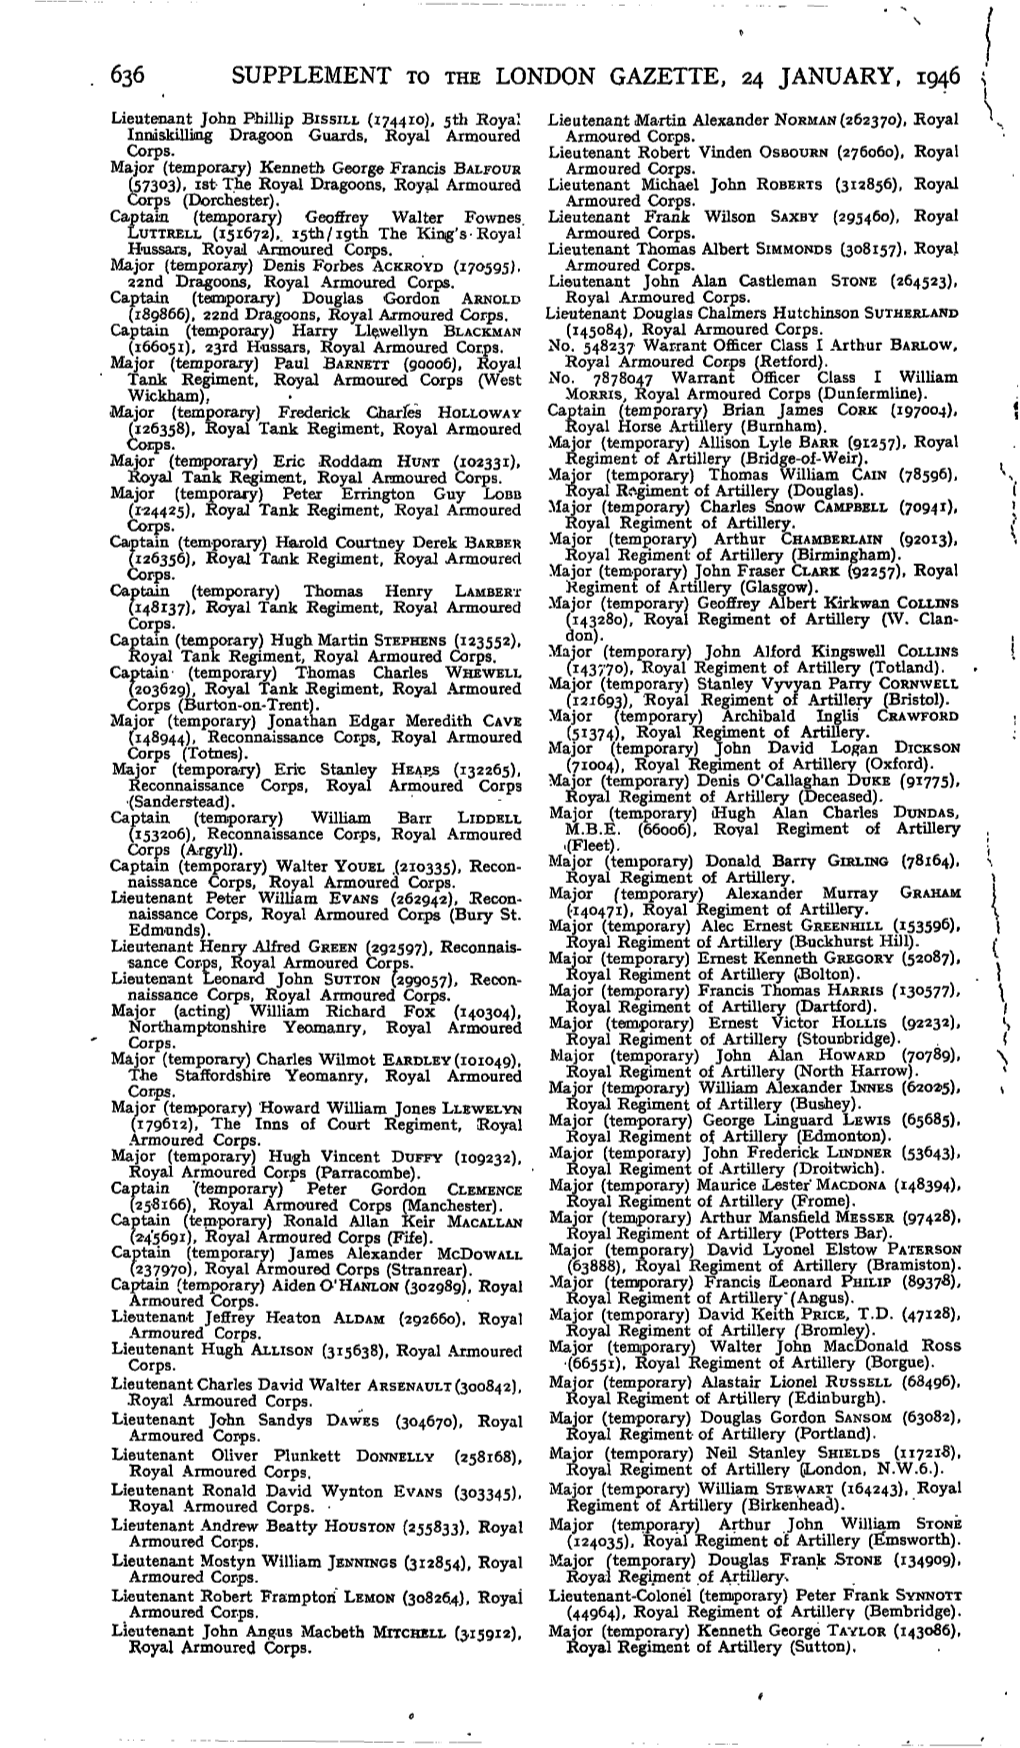 Supplement to the London Gazette, 24 January, 1946